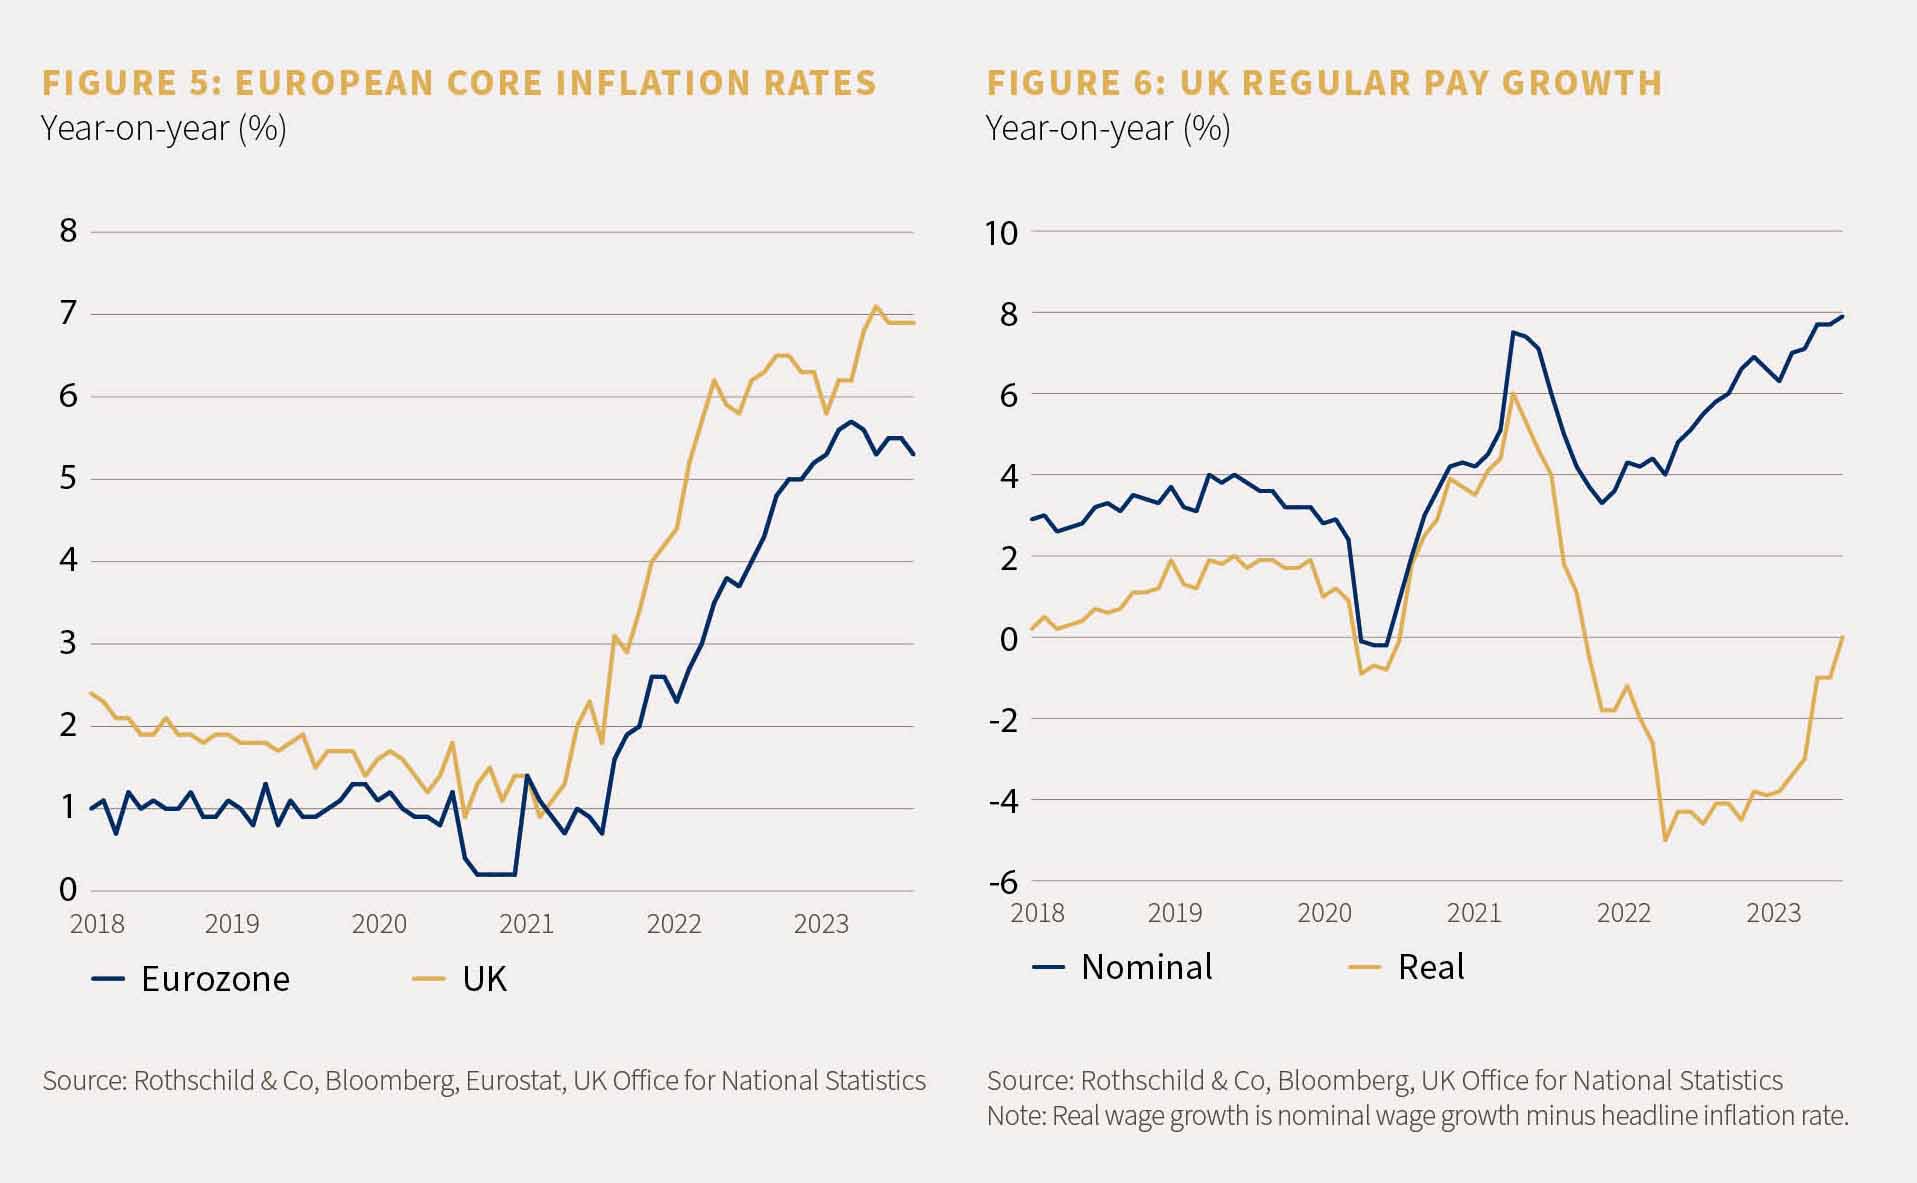 Chart 5 showing the european core inflation rates and chart 6 showing the UK regular pay growth year on year